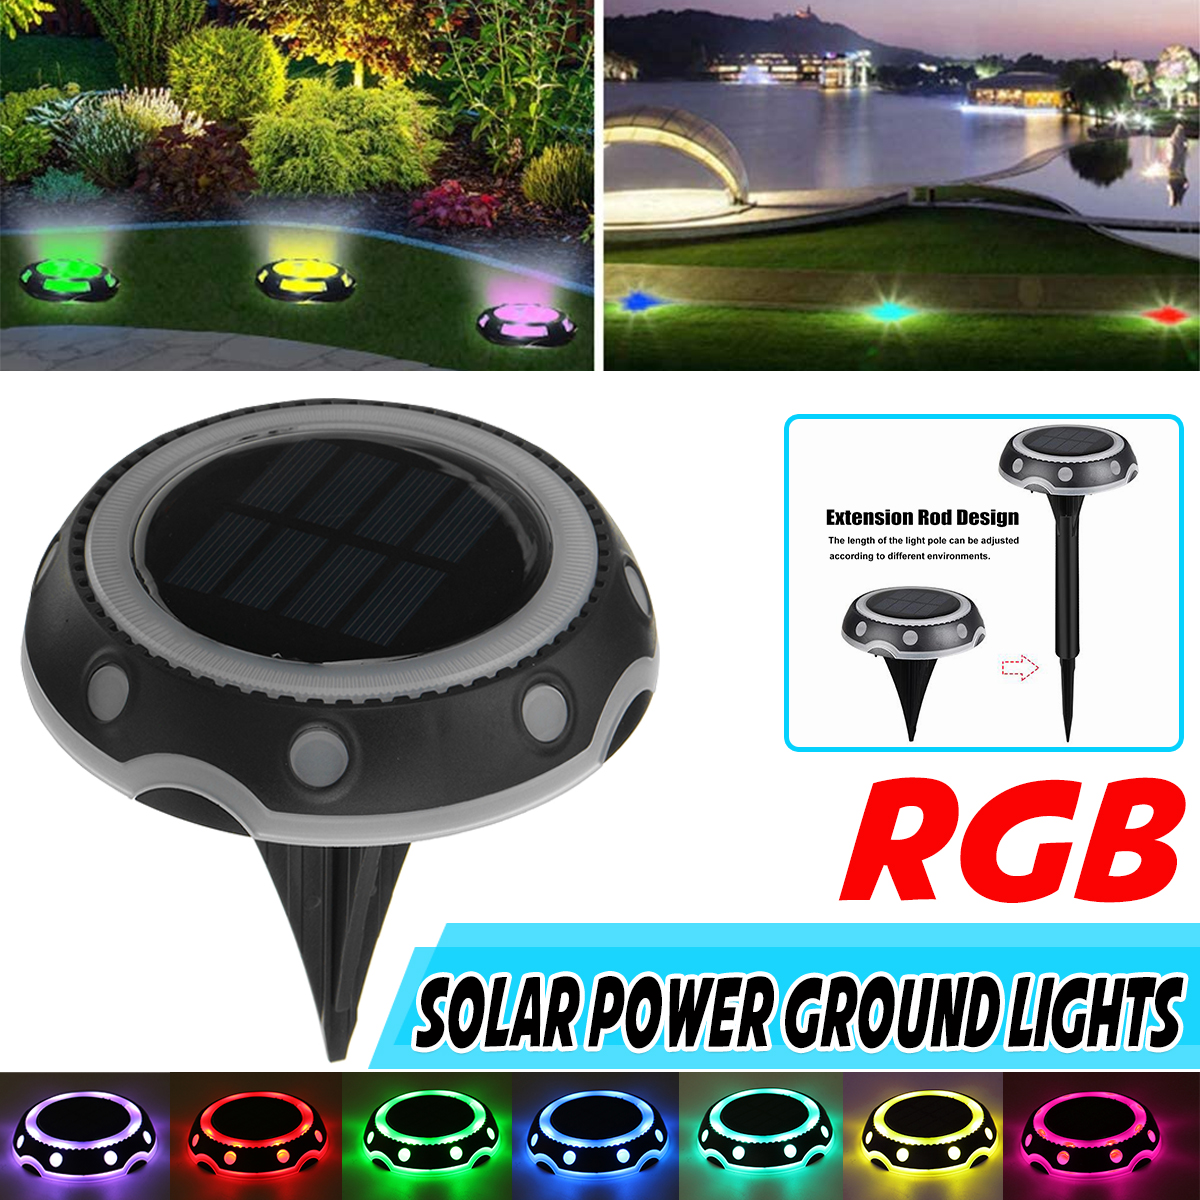 RGB-LED-Solar-Light-Colour-Changing-Ground-Buried-Garden-Lawn-Path-Outdoor-Lamp-1823442-1